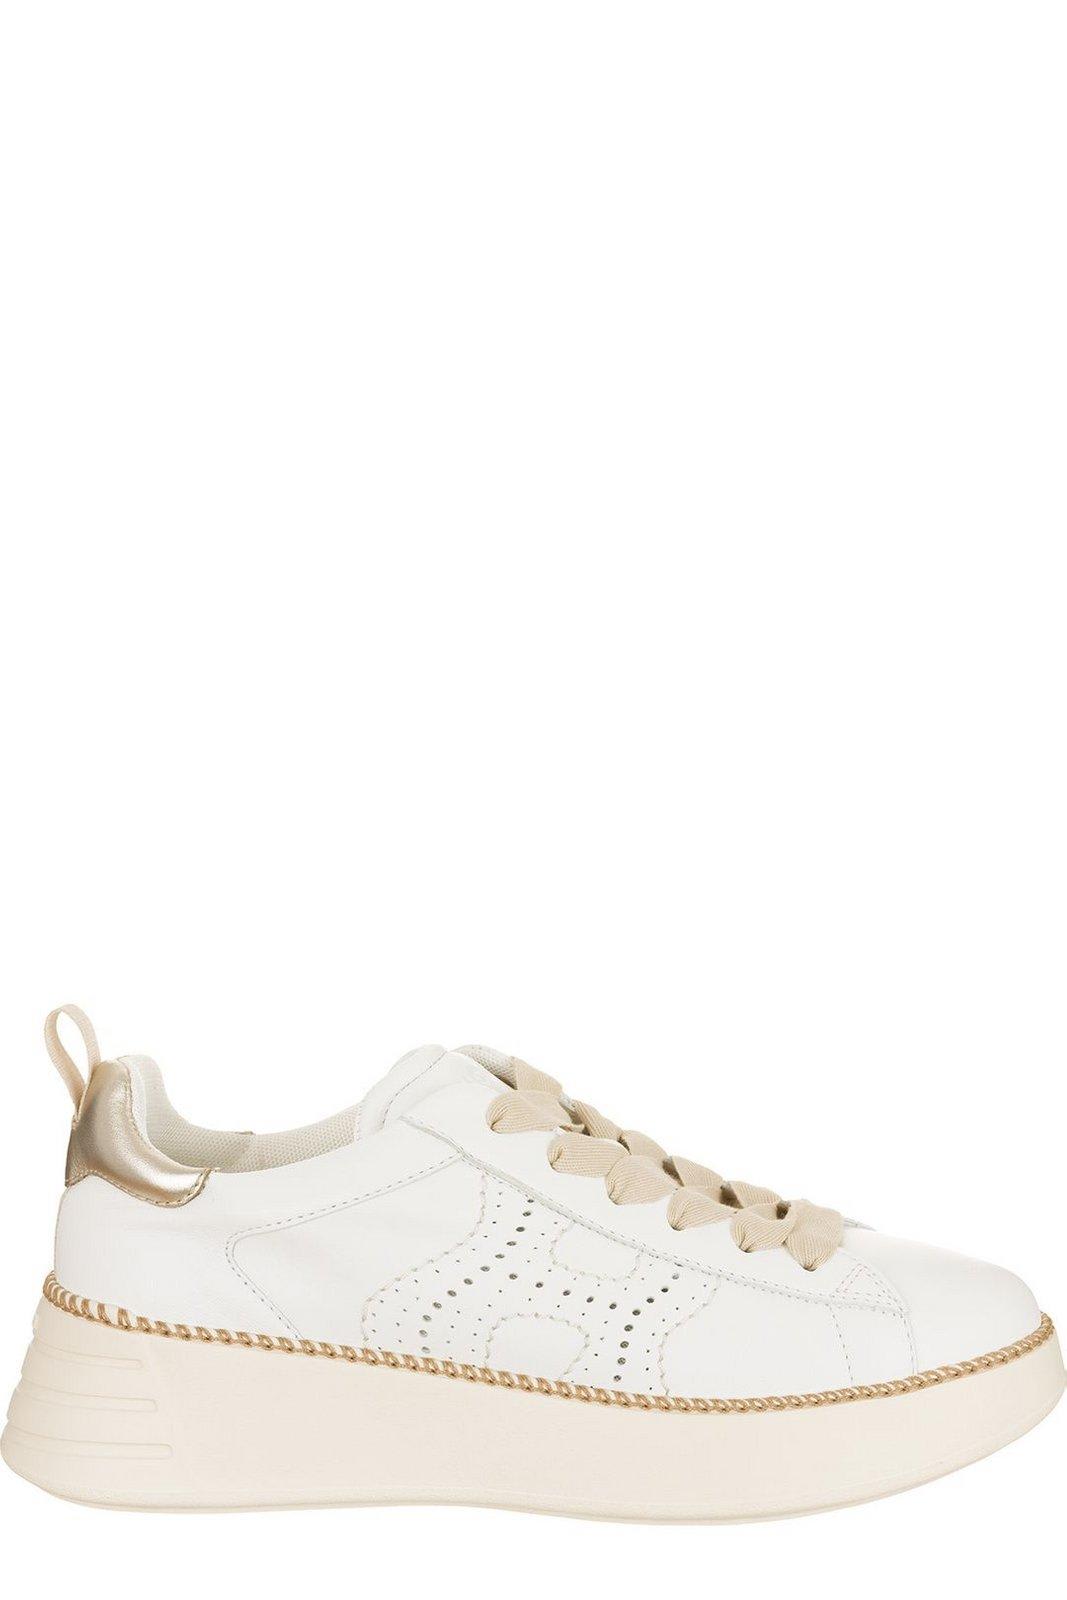 HOGAN PERFORATED DETAILED LACE-UP SNEAKERS